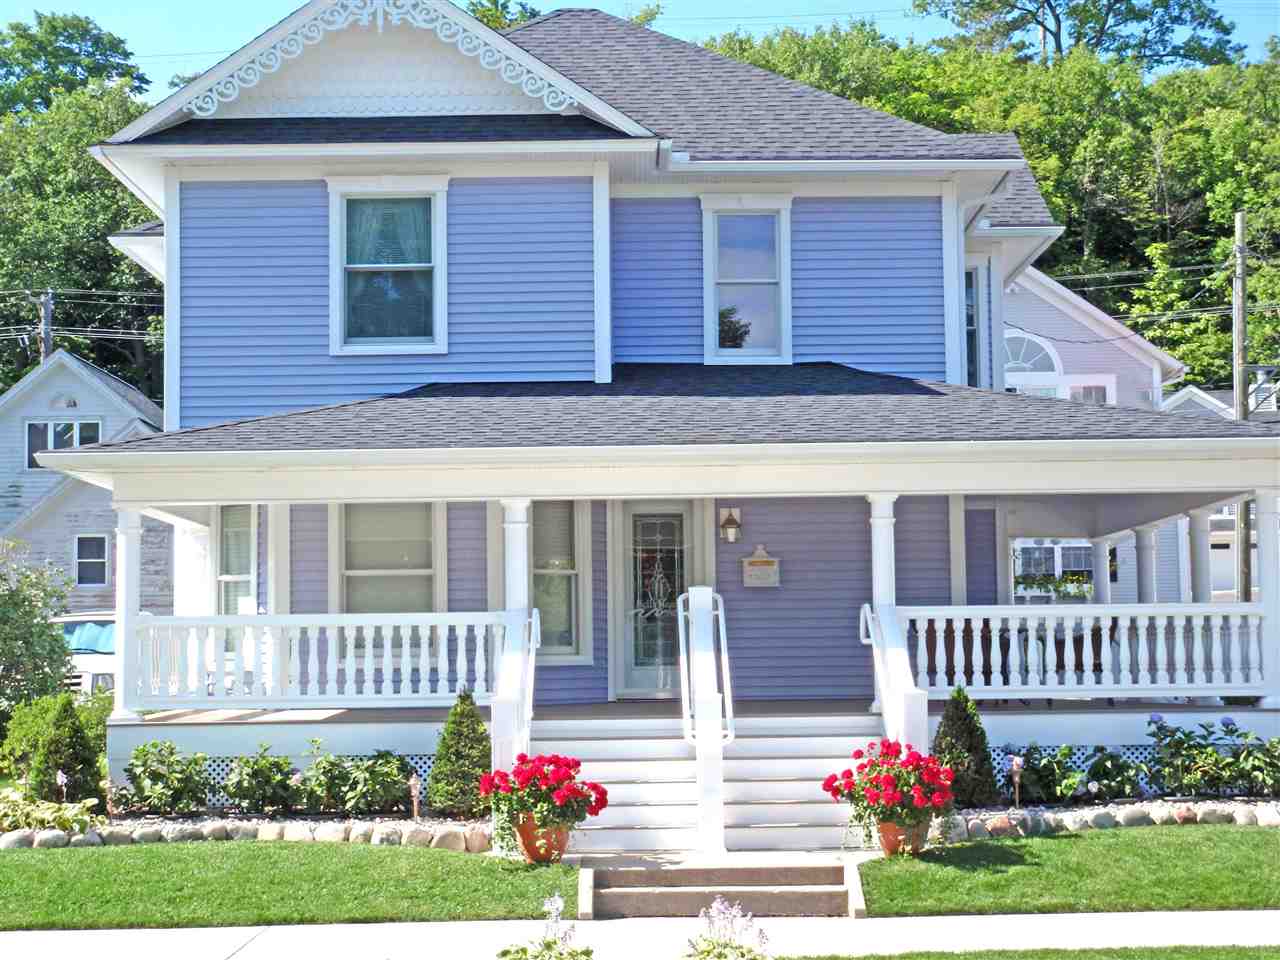 397 E Main Street, Harbor Springs, Michigan, 49740, United States, 2 Bedrooms Bedrooms, ,2 BathroomsBathrooms,Residential,For Sale,397 e main ST,1445962